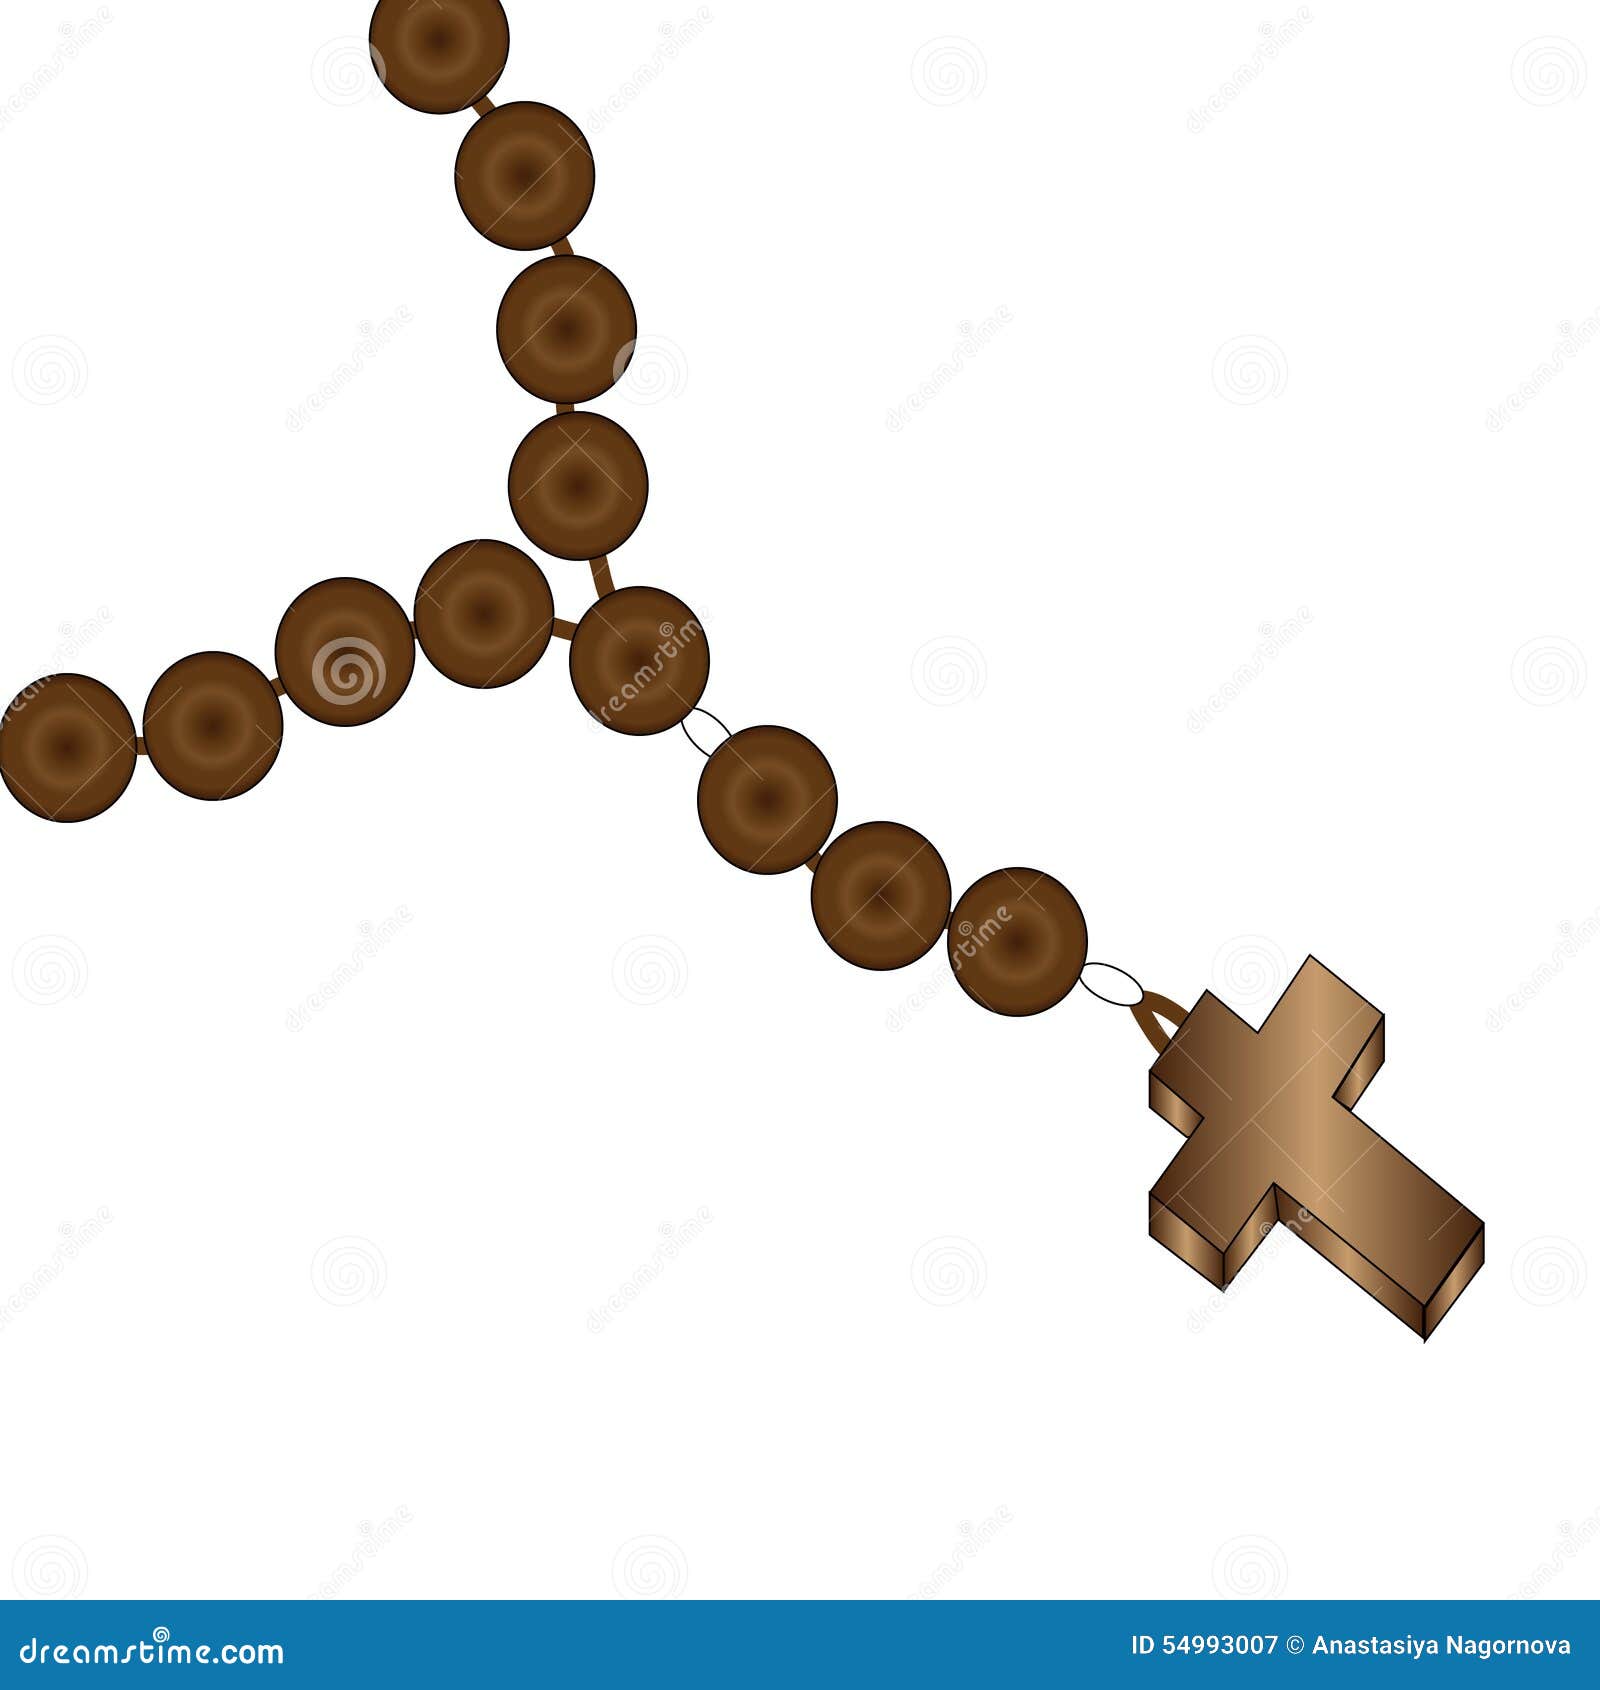 rosary clipart free download - photo #18